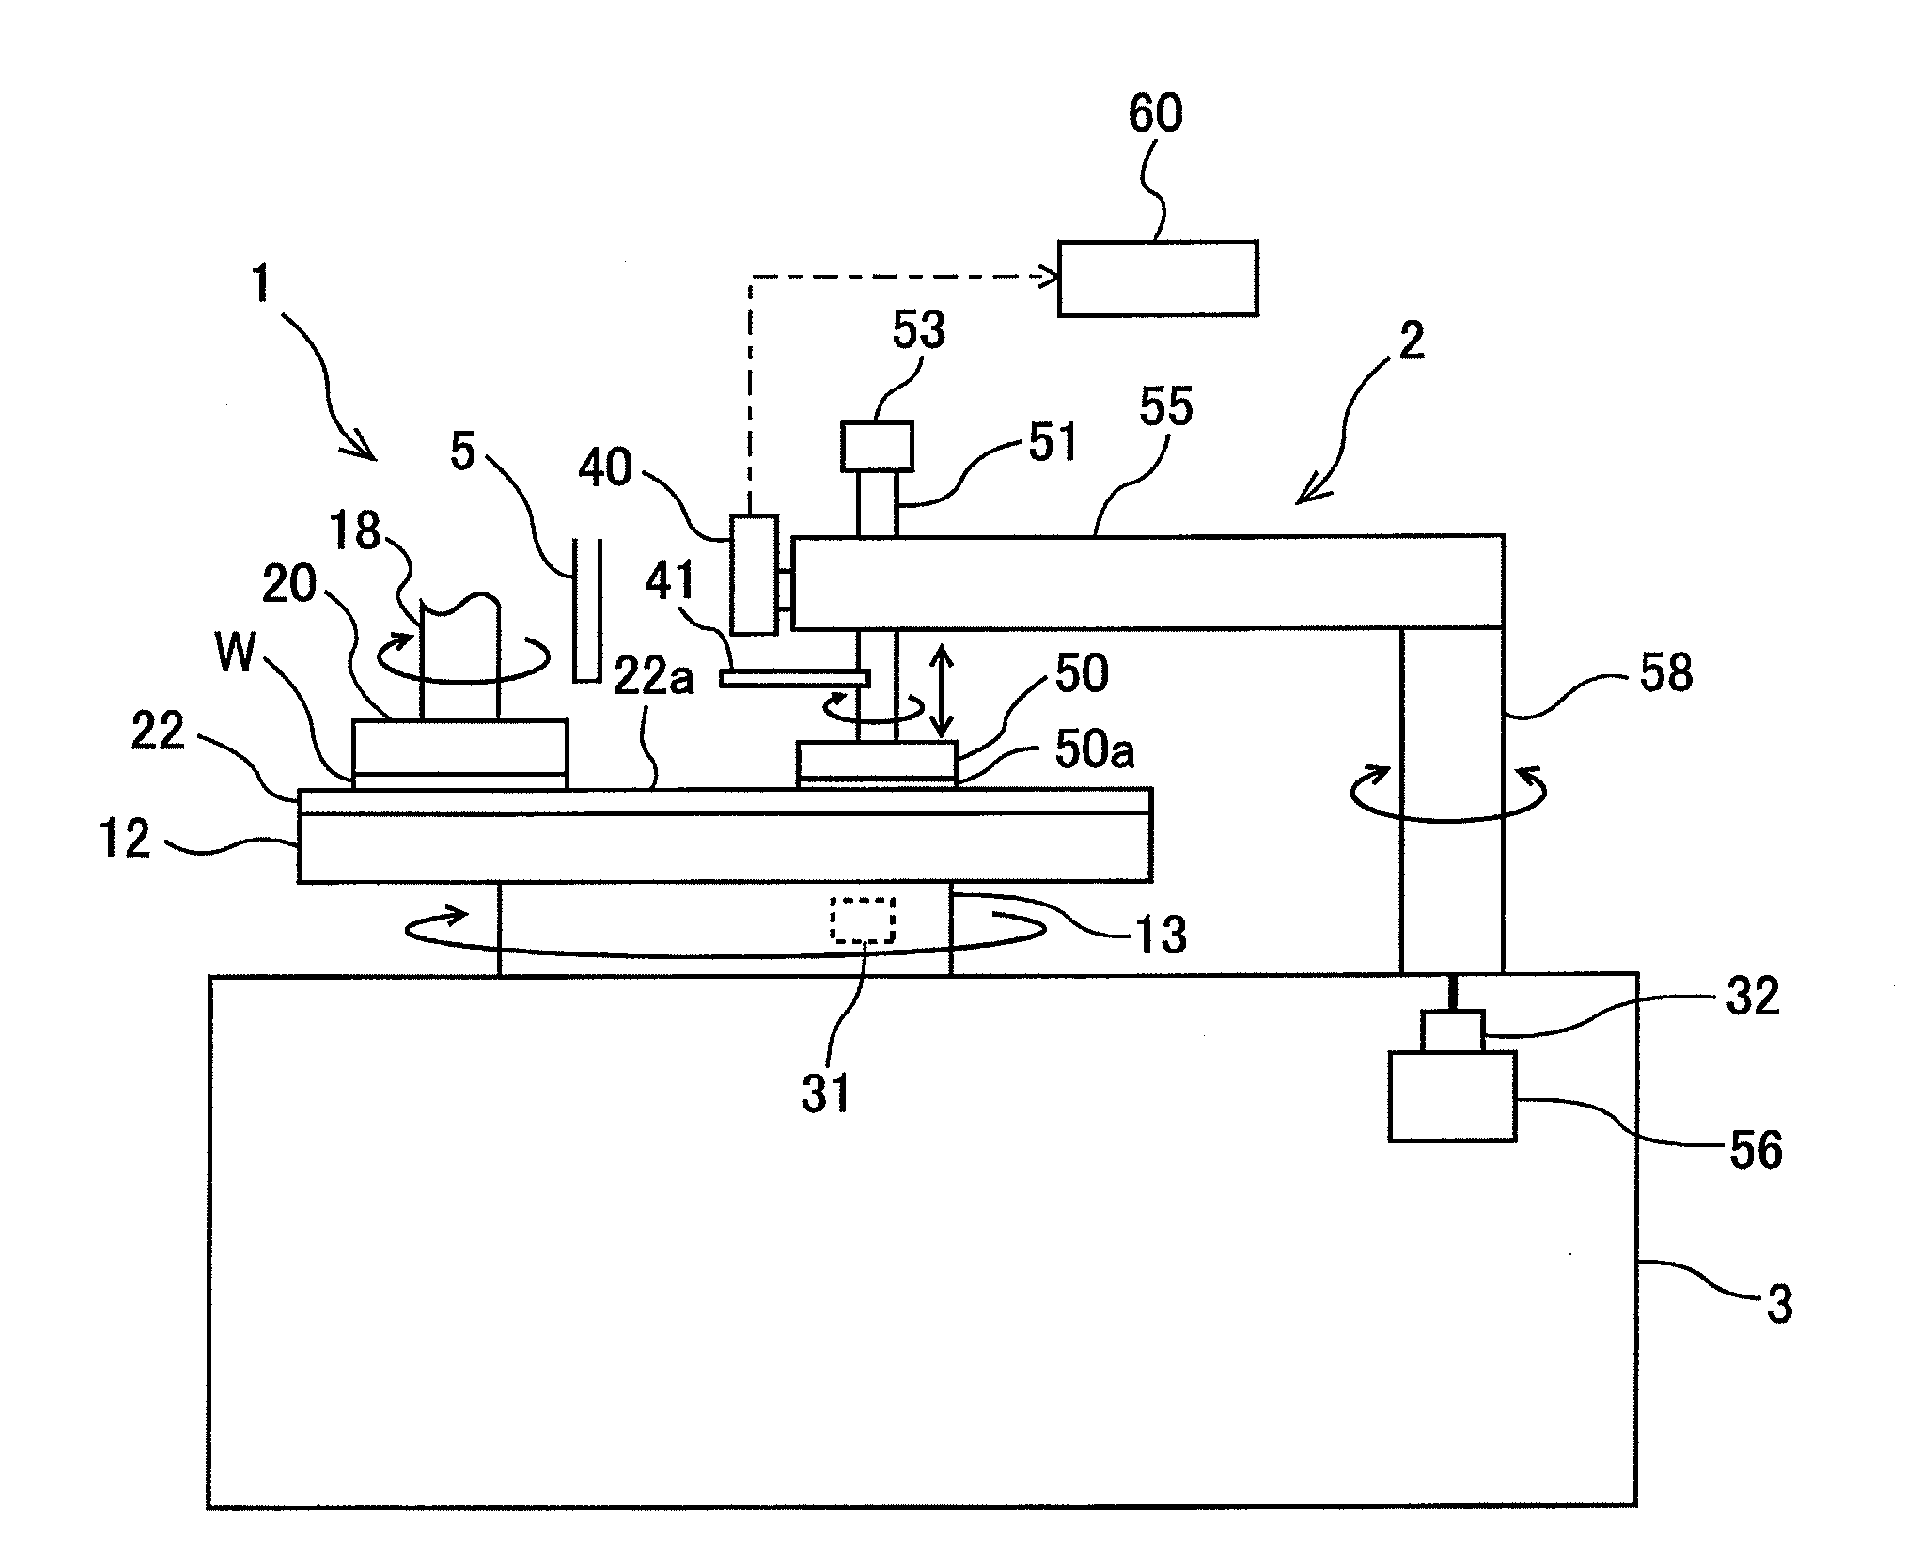 Method and apparatus for monitoring a polishing surface of a polishing pad used in polishing apparatus